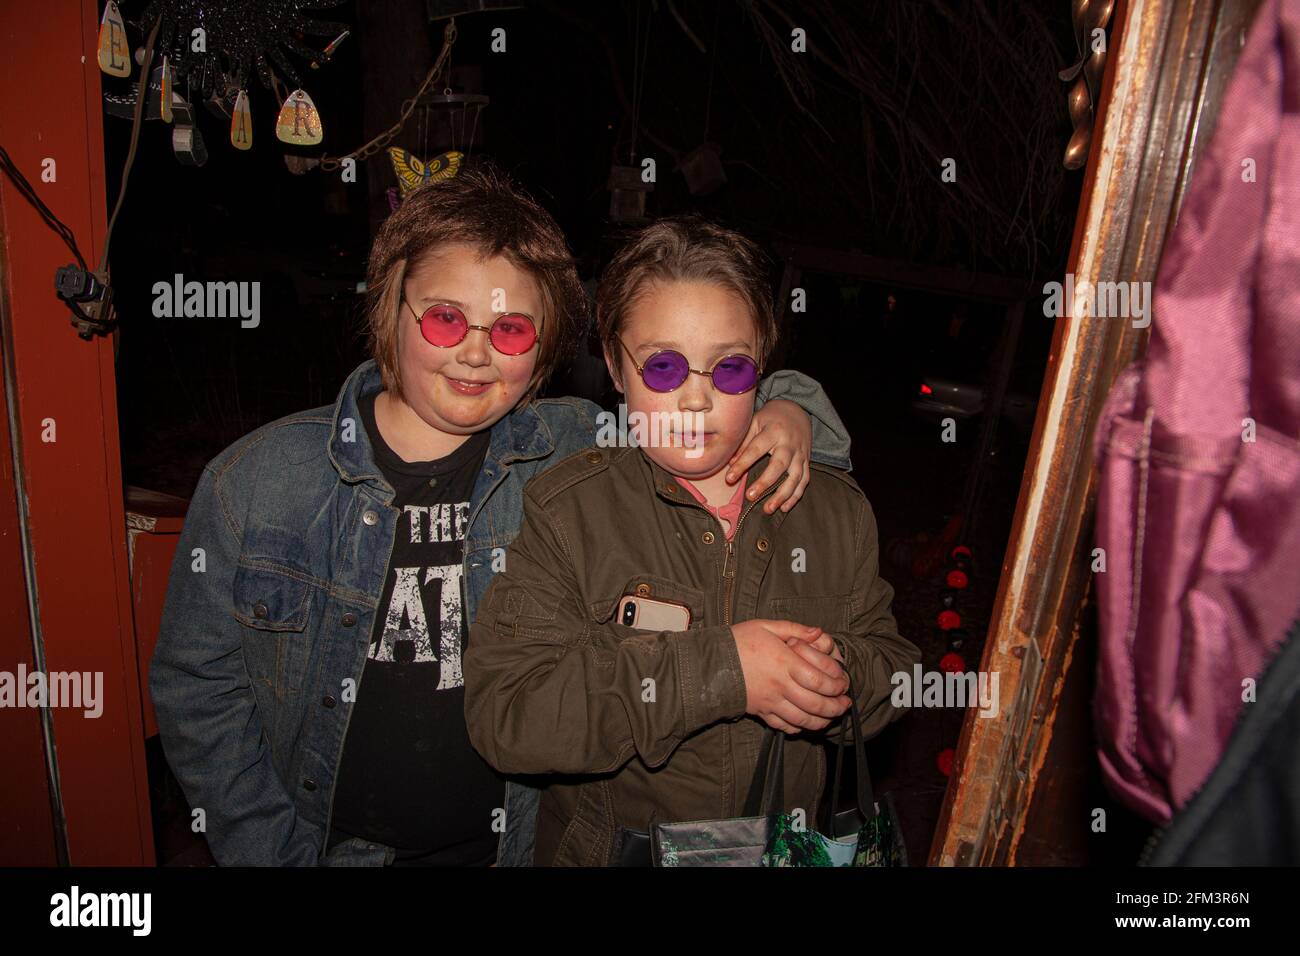 Cool looking preteen girls out trick or treating on Halloween evening wearing red and purple glasses. St Paul Minnesota MN USA Stock Photo